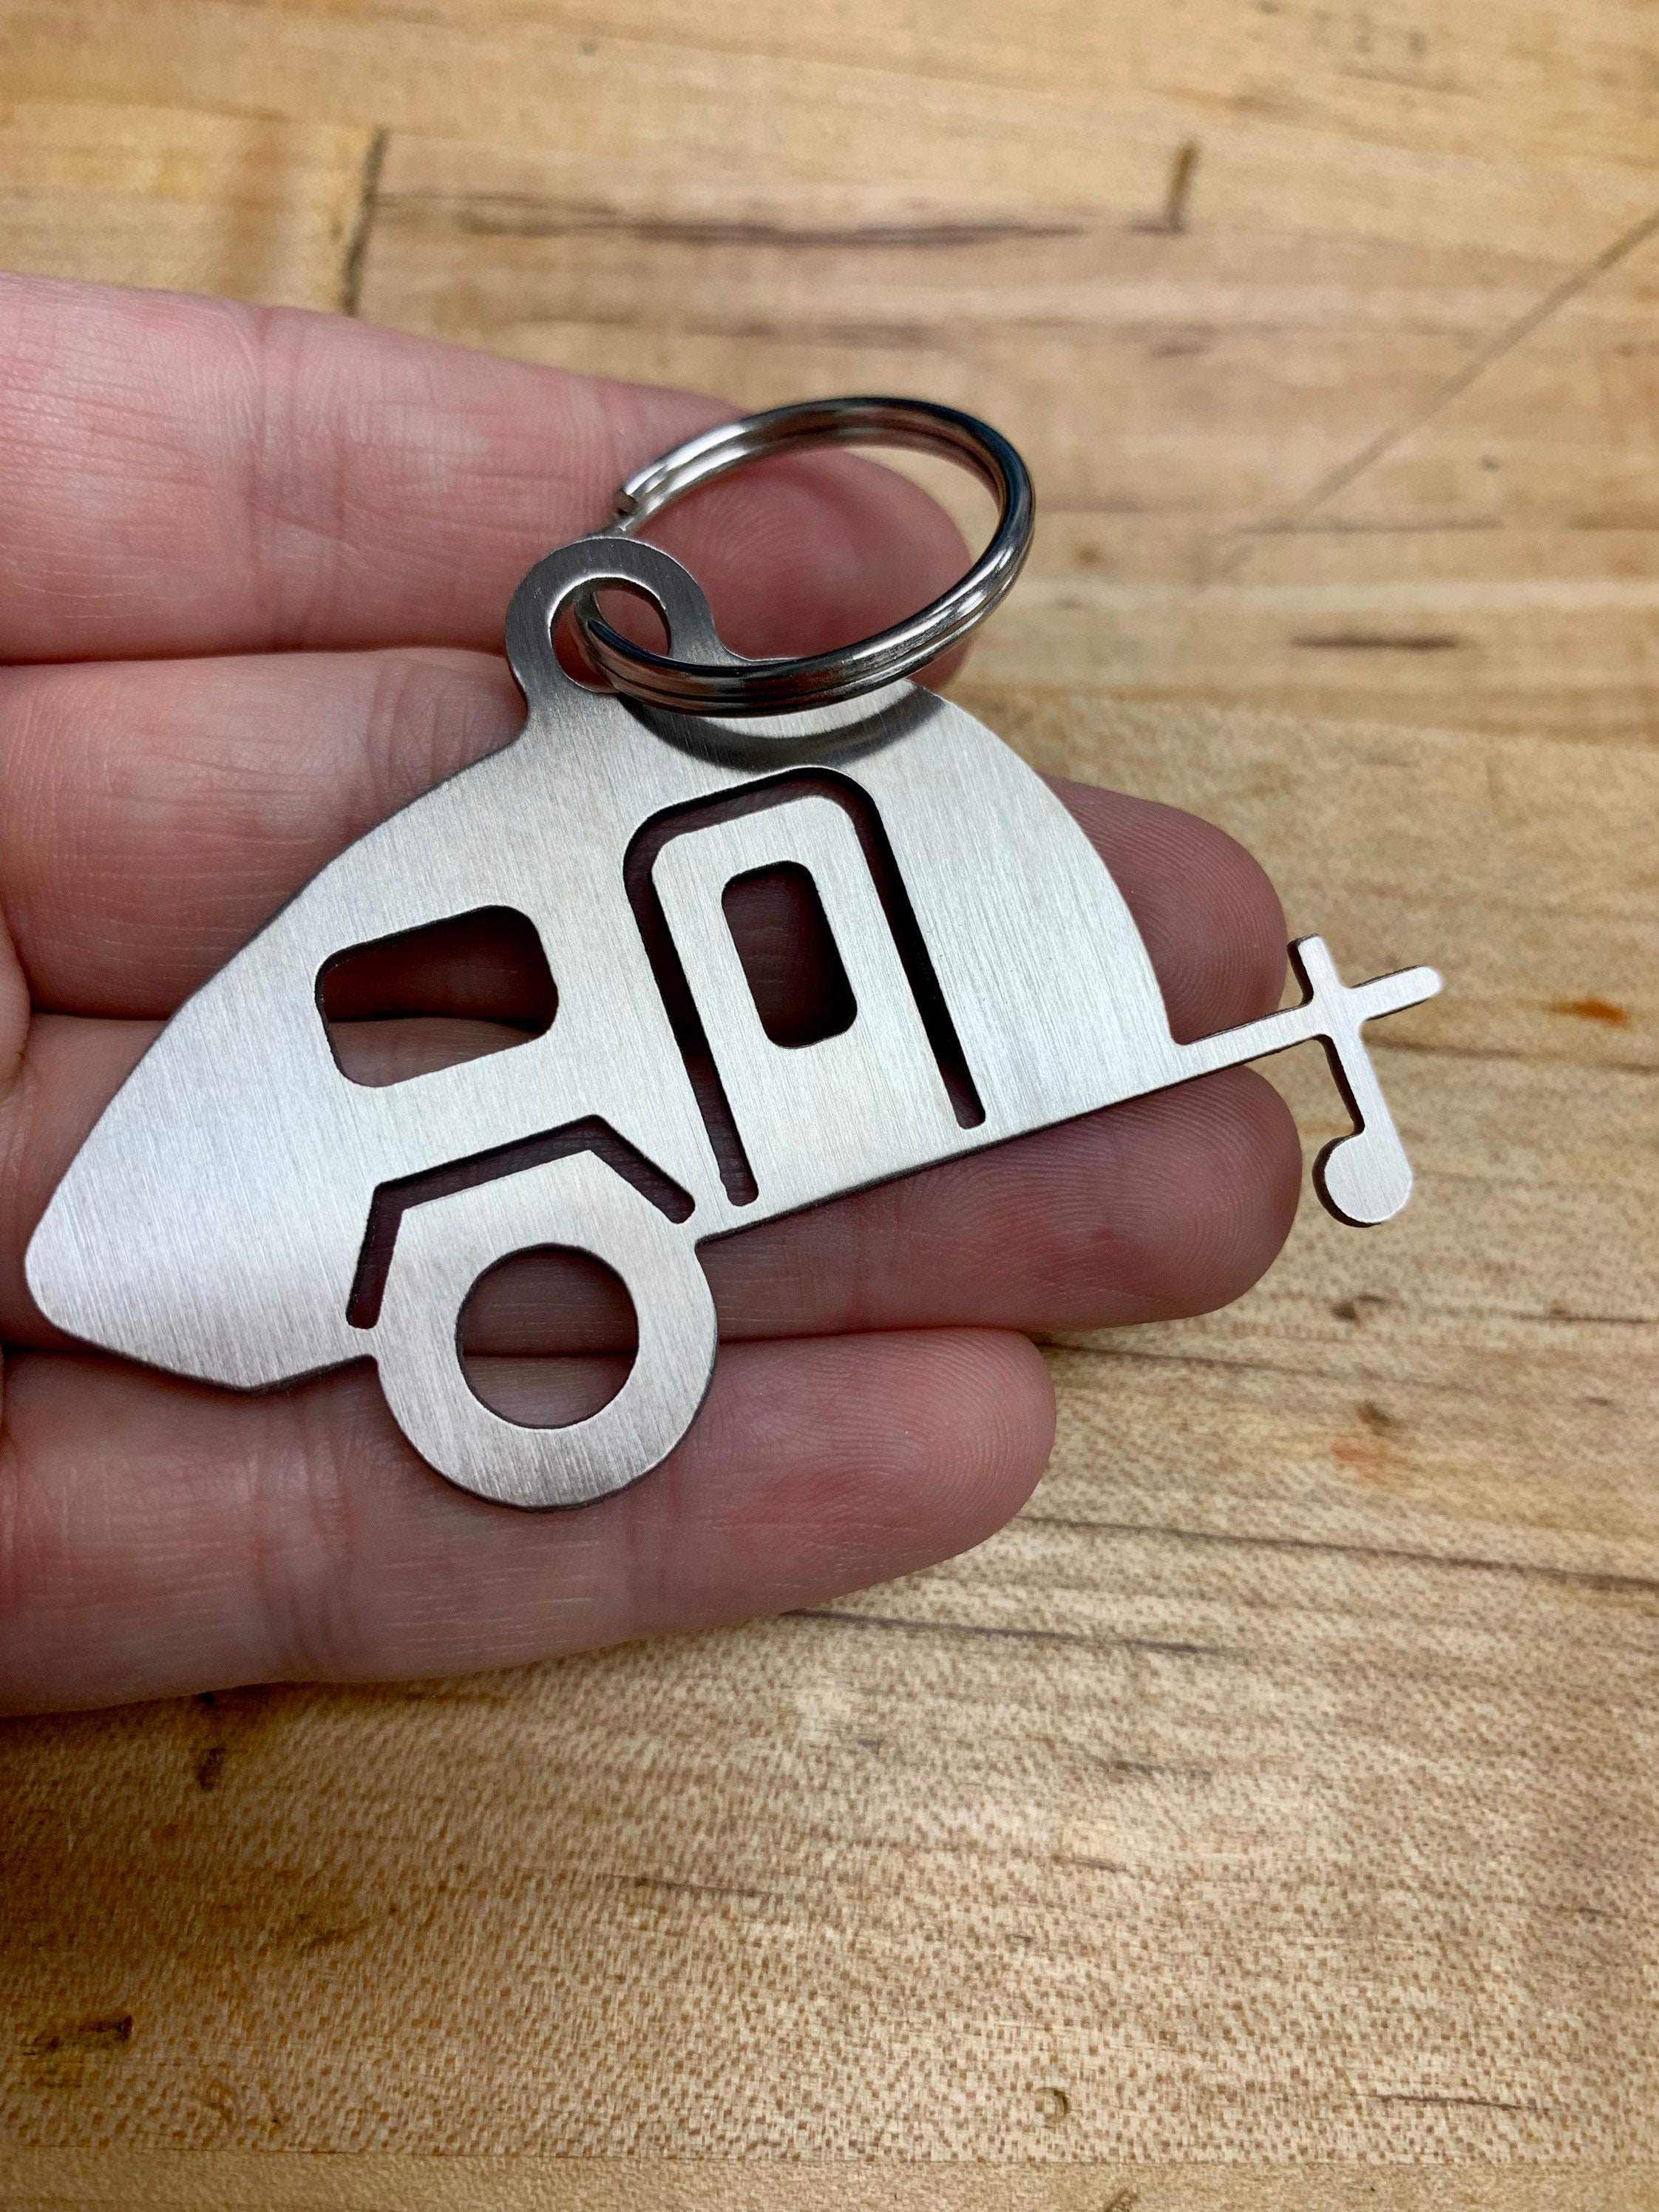 Camper Keychain Clip (Tan) Buy At DailyObjects